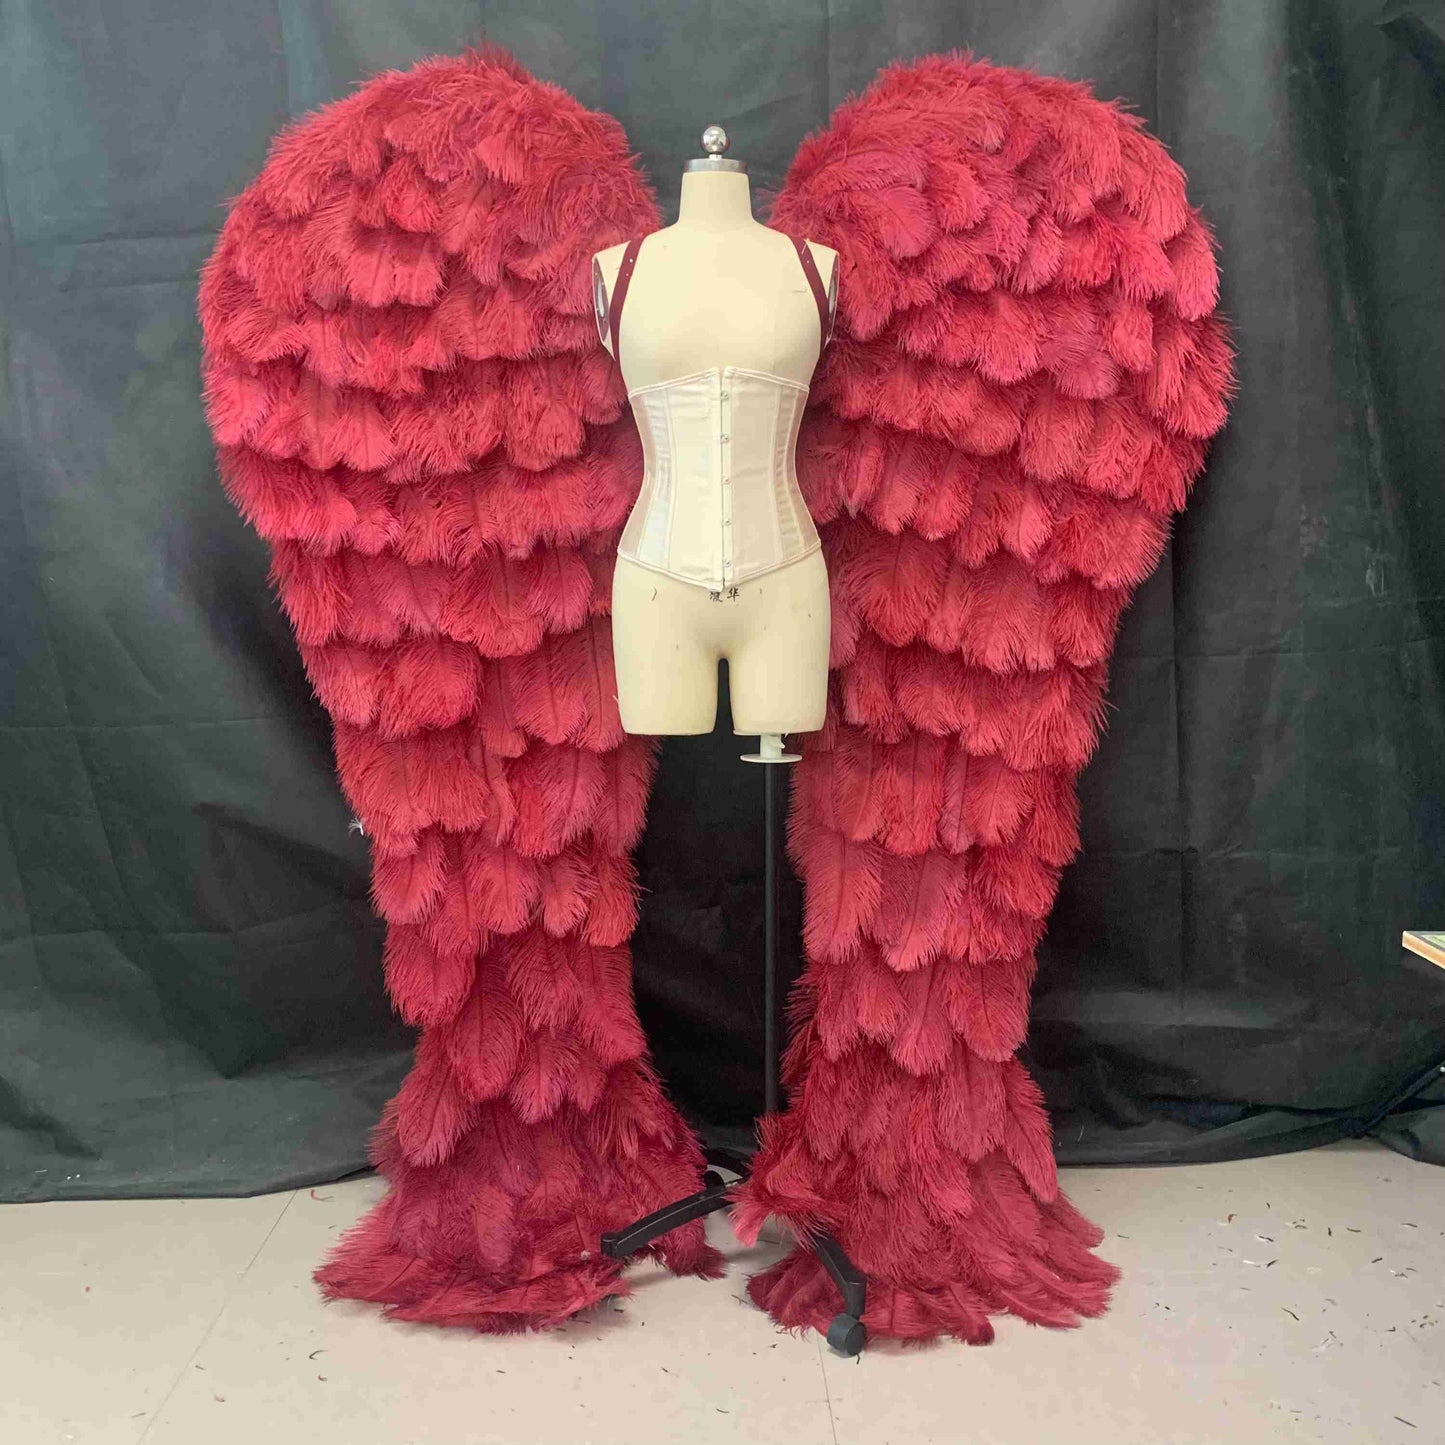 Our luxury red angel wings from the front. Made from ostrich feathers. Wings for angel costume. Suitable for photoshoots especially for boudoirs.